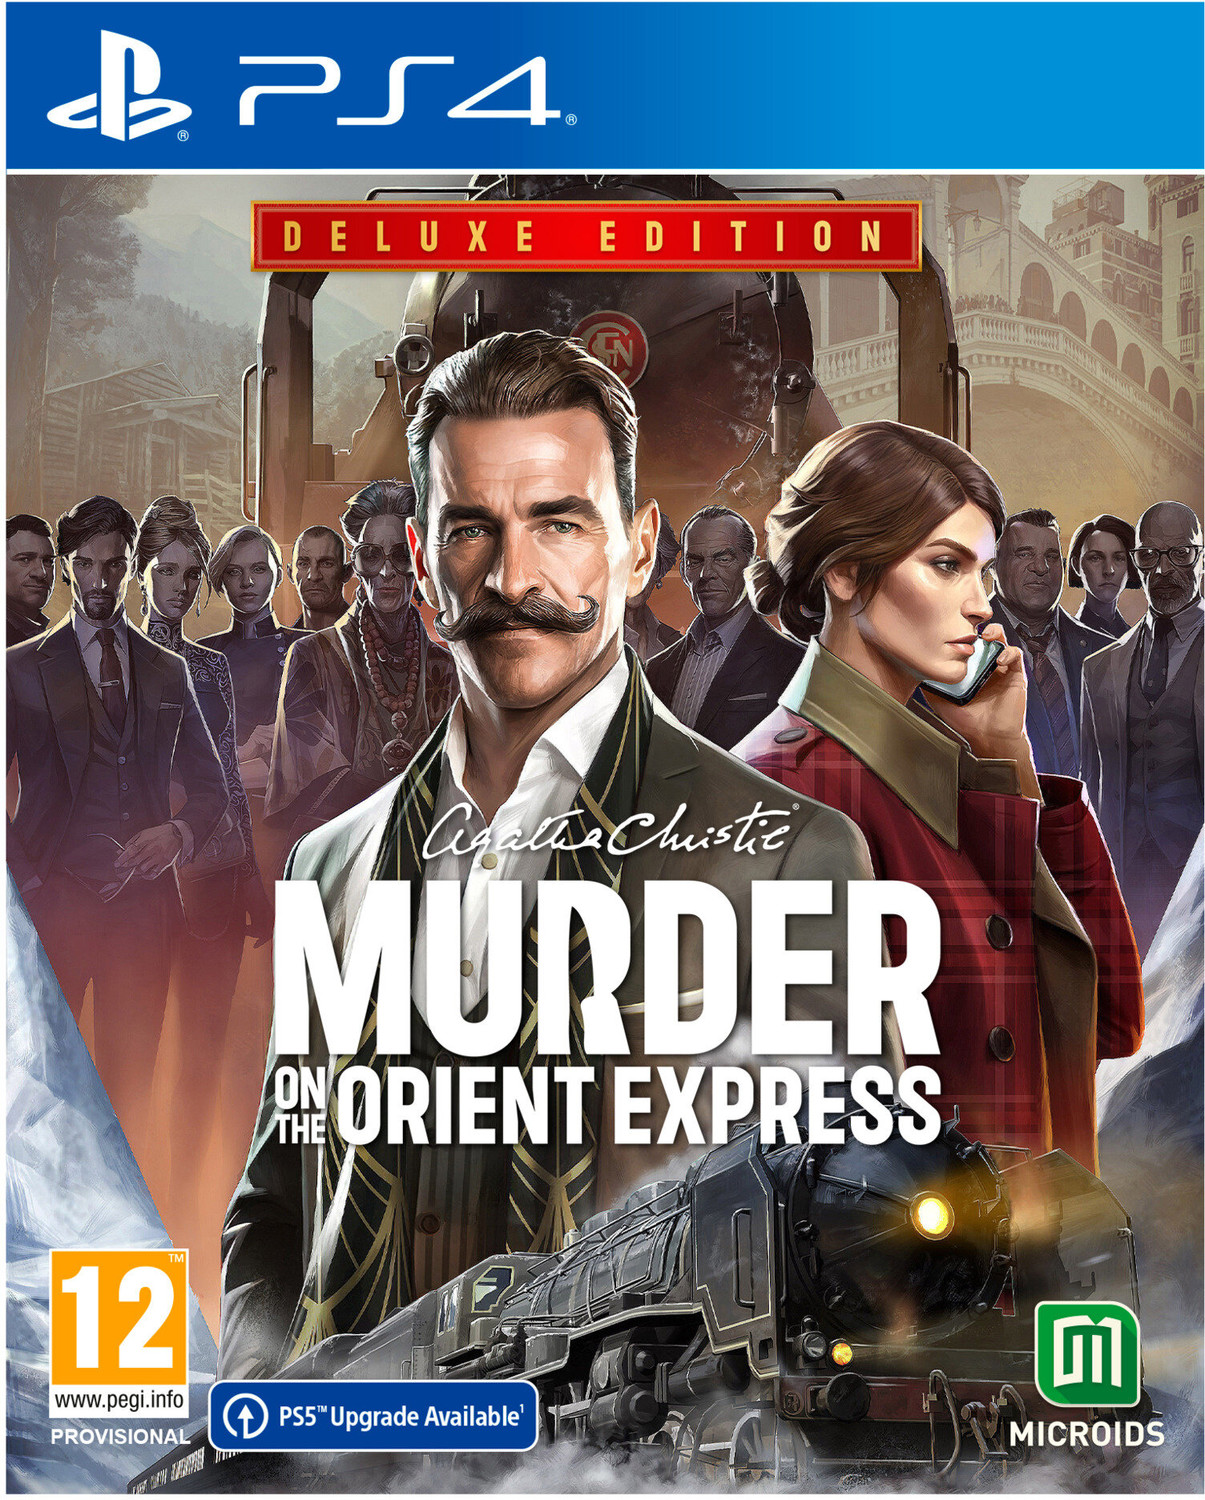 Agatha Christie - Murder on Orient Express - Deluxe Edition (PS4) - 03701529508998